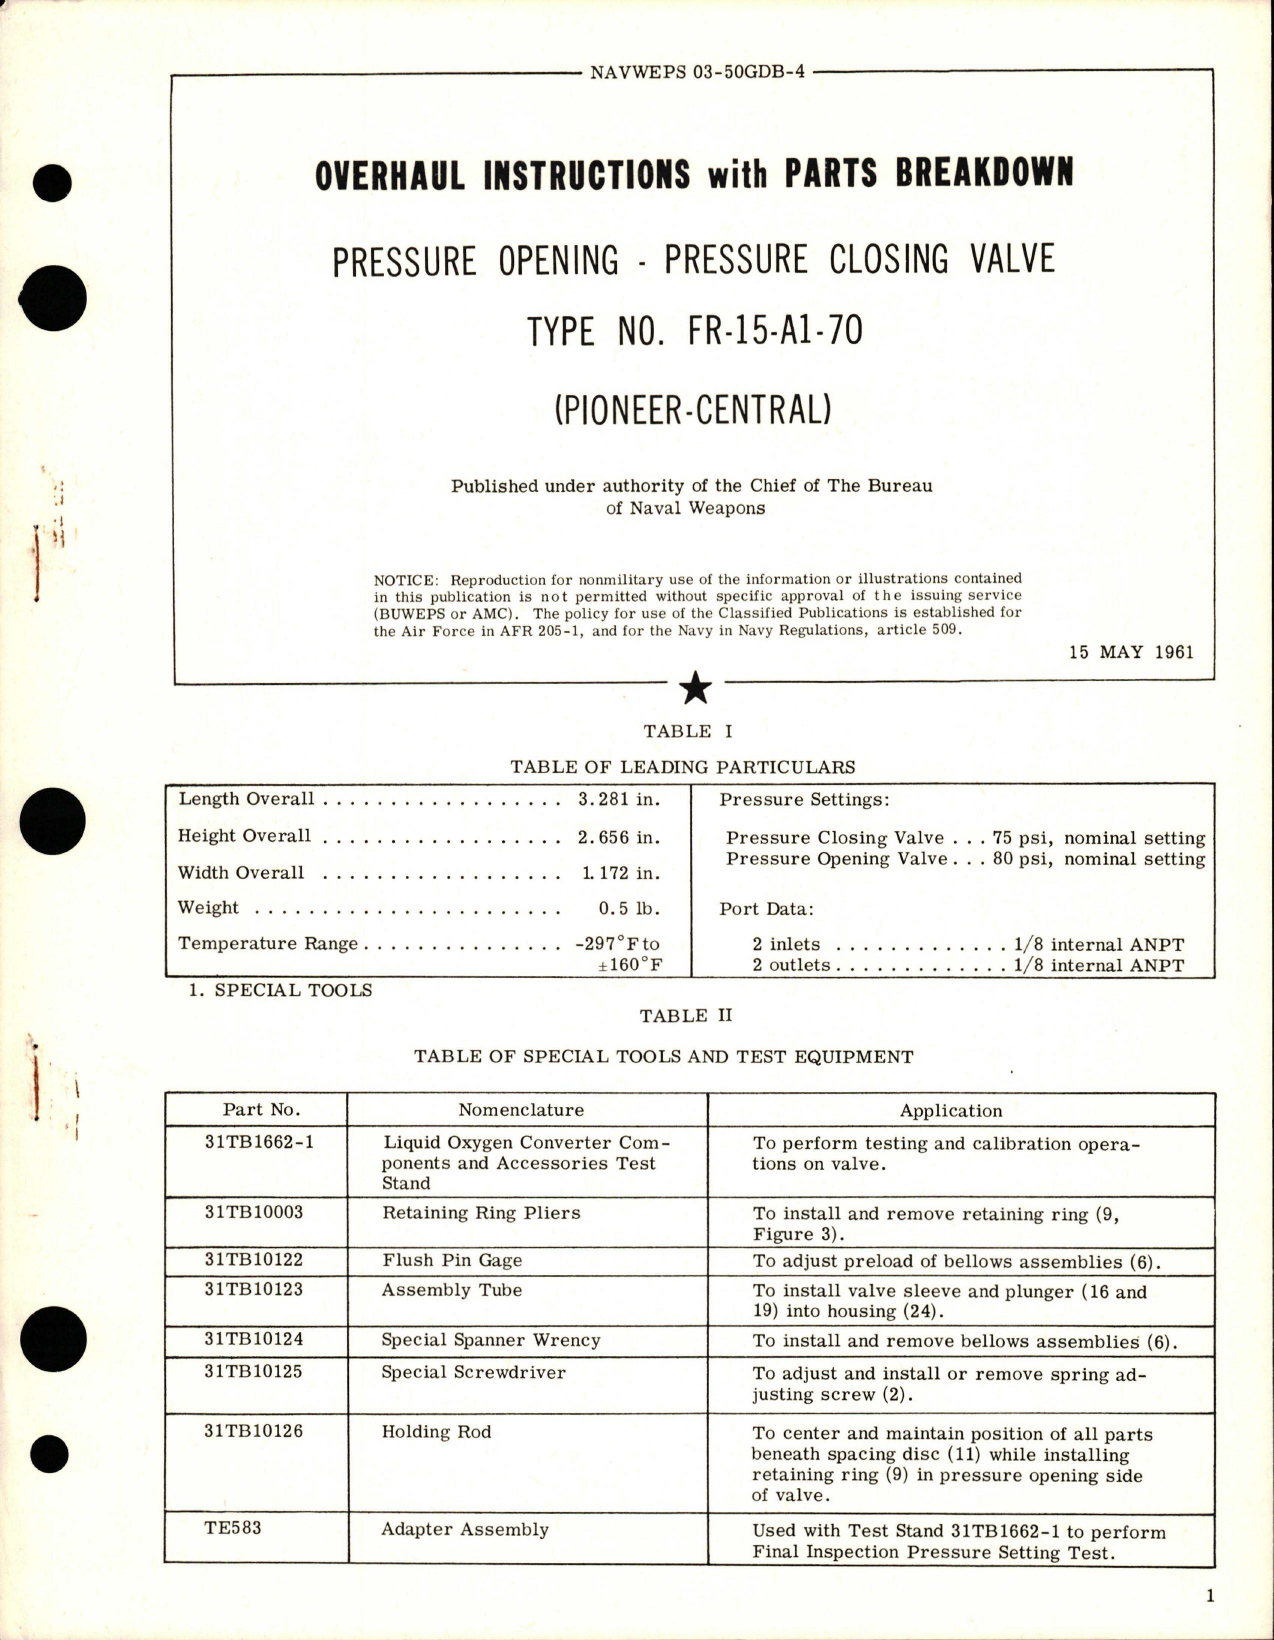 Sample page 1 from AirCorps Library document: Overhaul Instructions with Parts Breakdown for Pressure Opening and Closing Valve - Type FR-15-A1-70